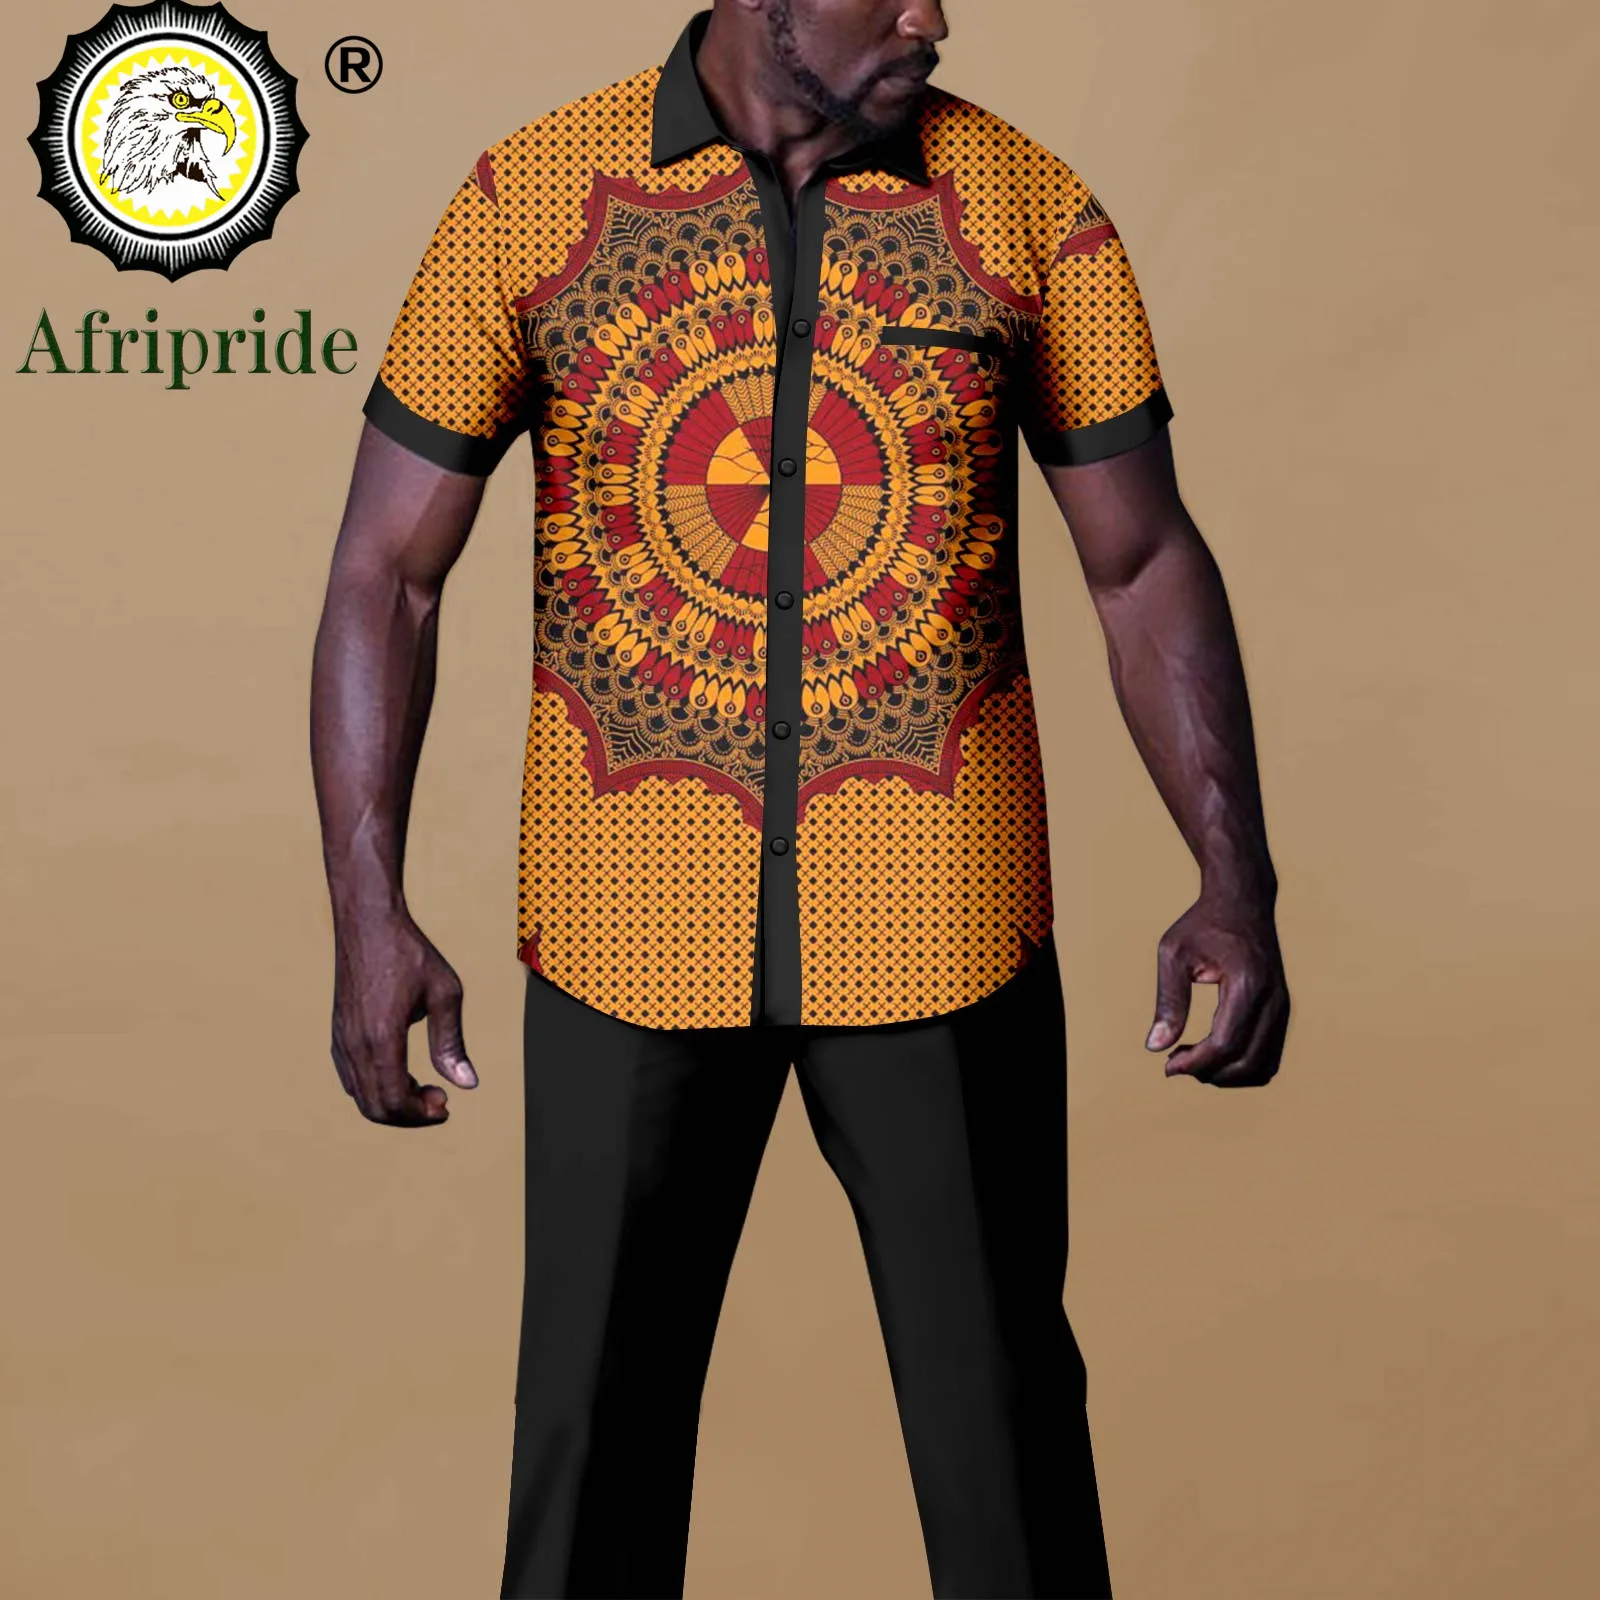 African Outfits for Men Tracksuit Short Sleeve Print Shirts and Pants Set Dashiki Outfits Plus Size Casual Sweatsuits A2216089 african clothes for men zip shirts and ankara pants 2 piece set dashiki outfits tribal tracksuit bazin riche outfits a2216073